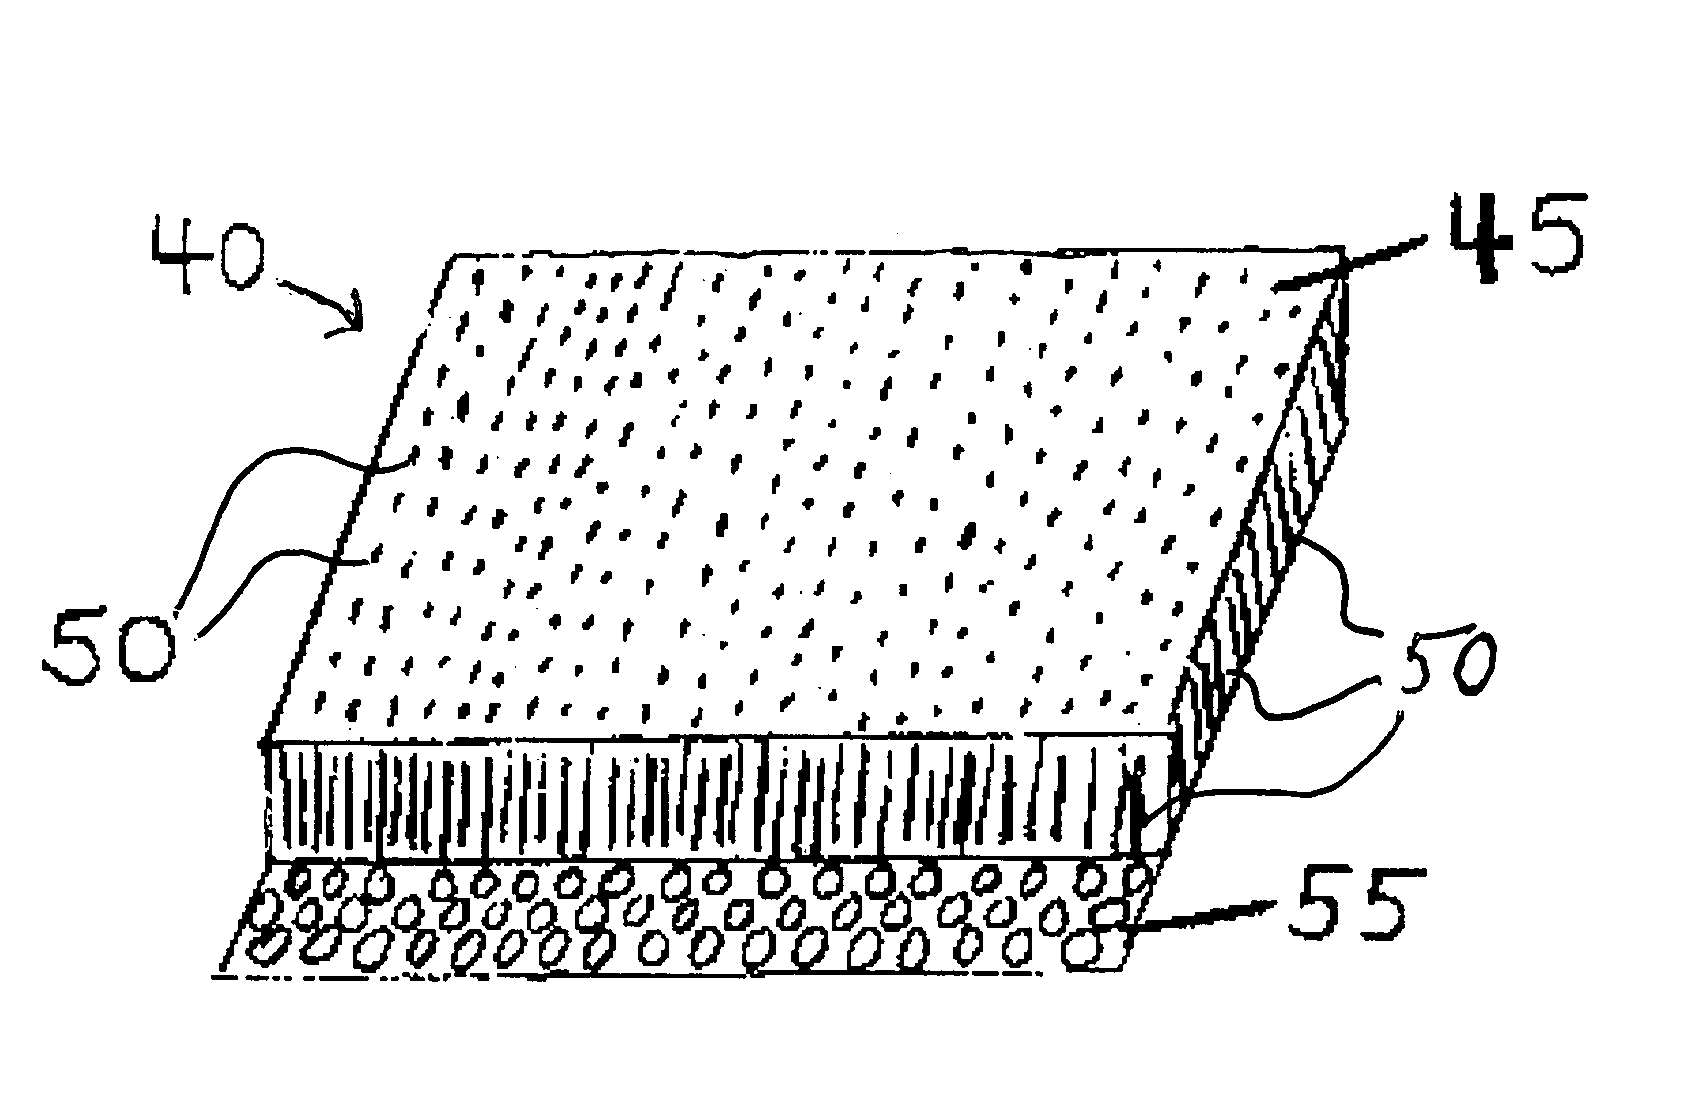 Fast drying, water permeable padding and immobilization apparatus and method thereof